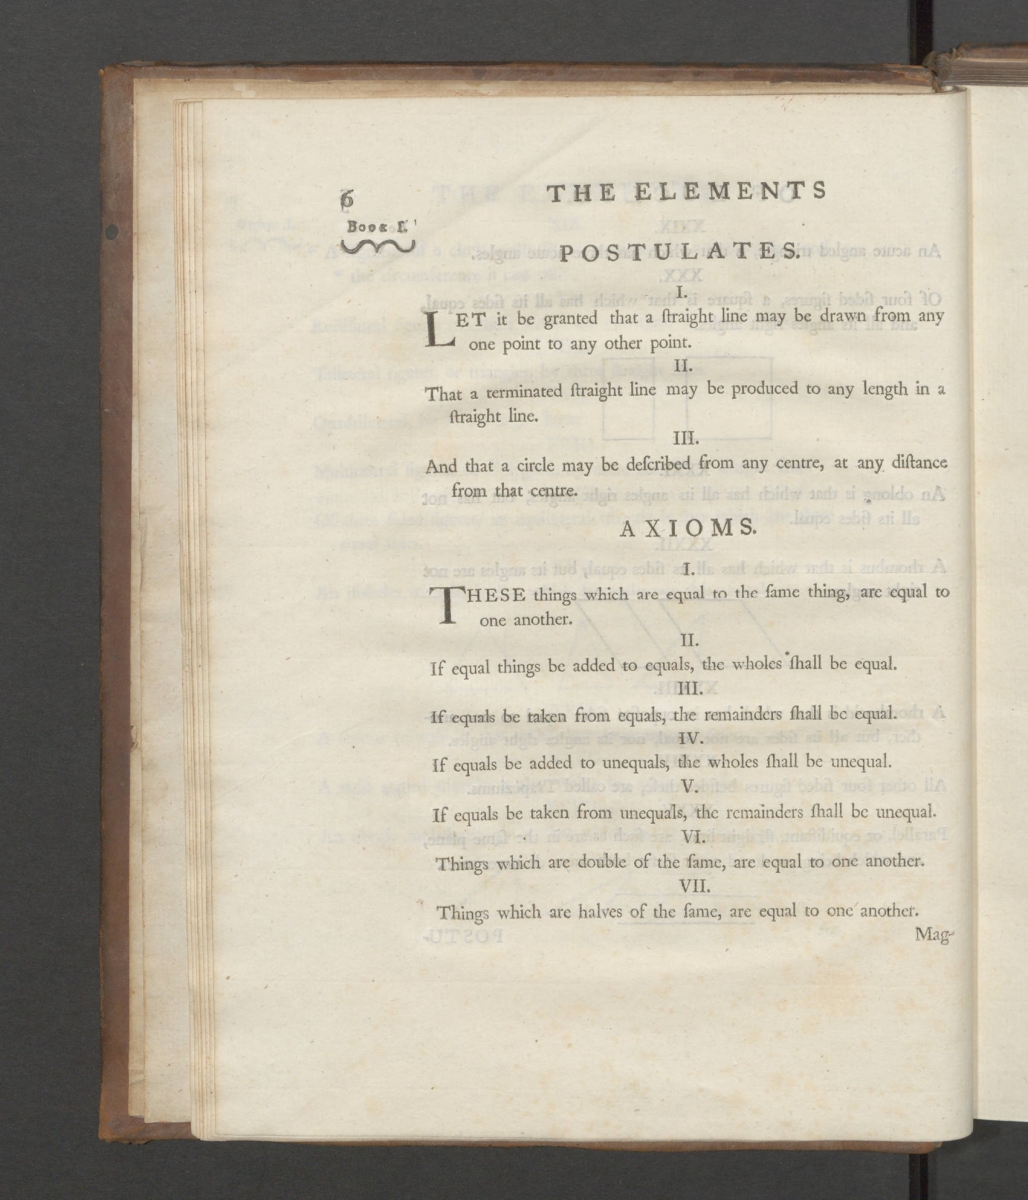 Page 6 of Robert Simson's 1756 The Elements of Euclid.